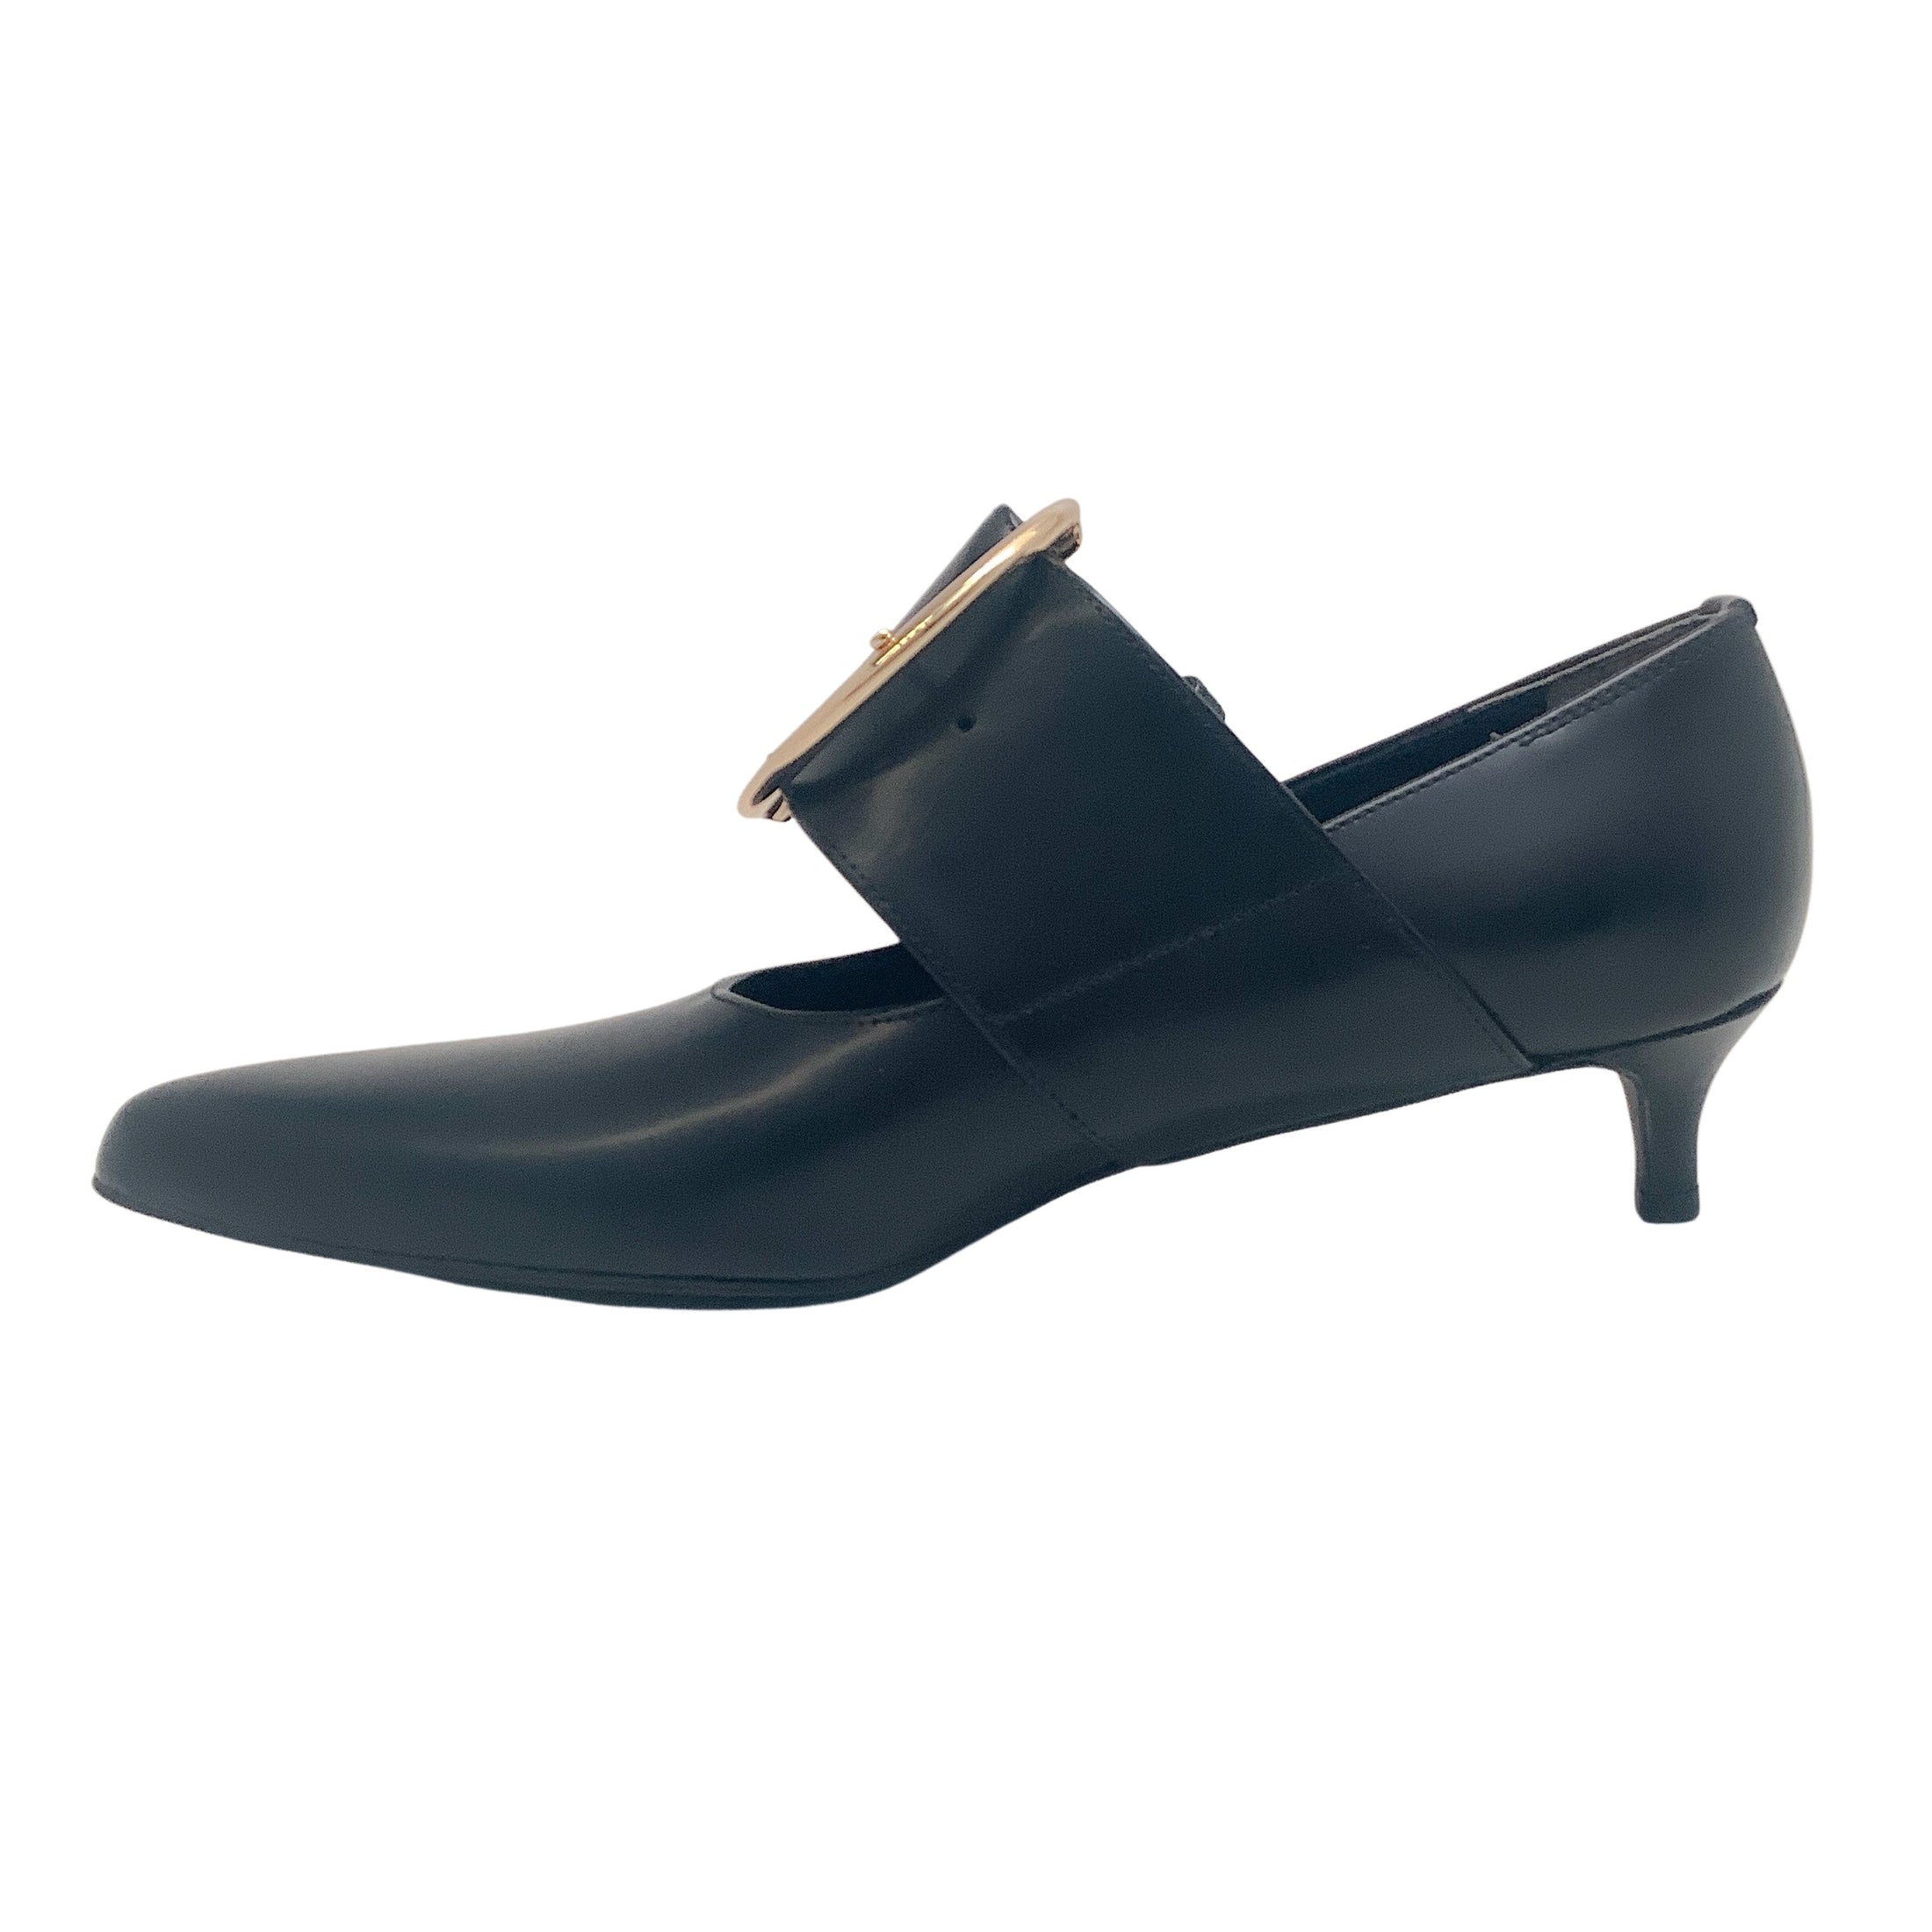 Comme des Garcons Black Leather Kitten Heel Pumps with Gold Buckle